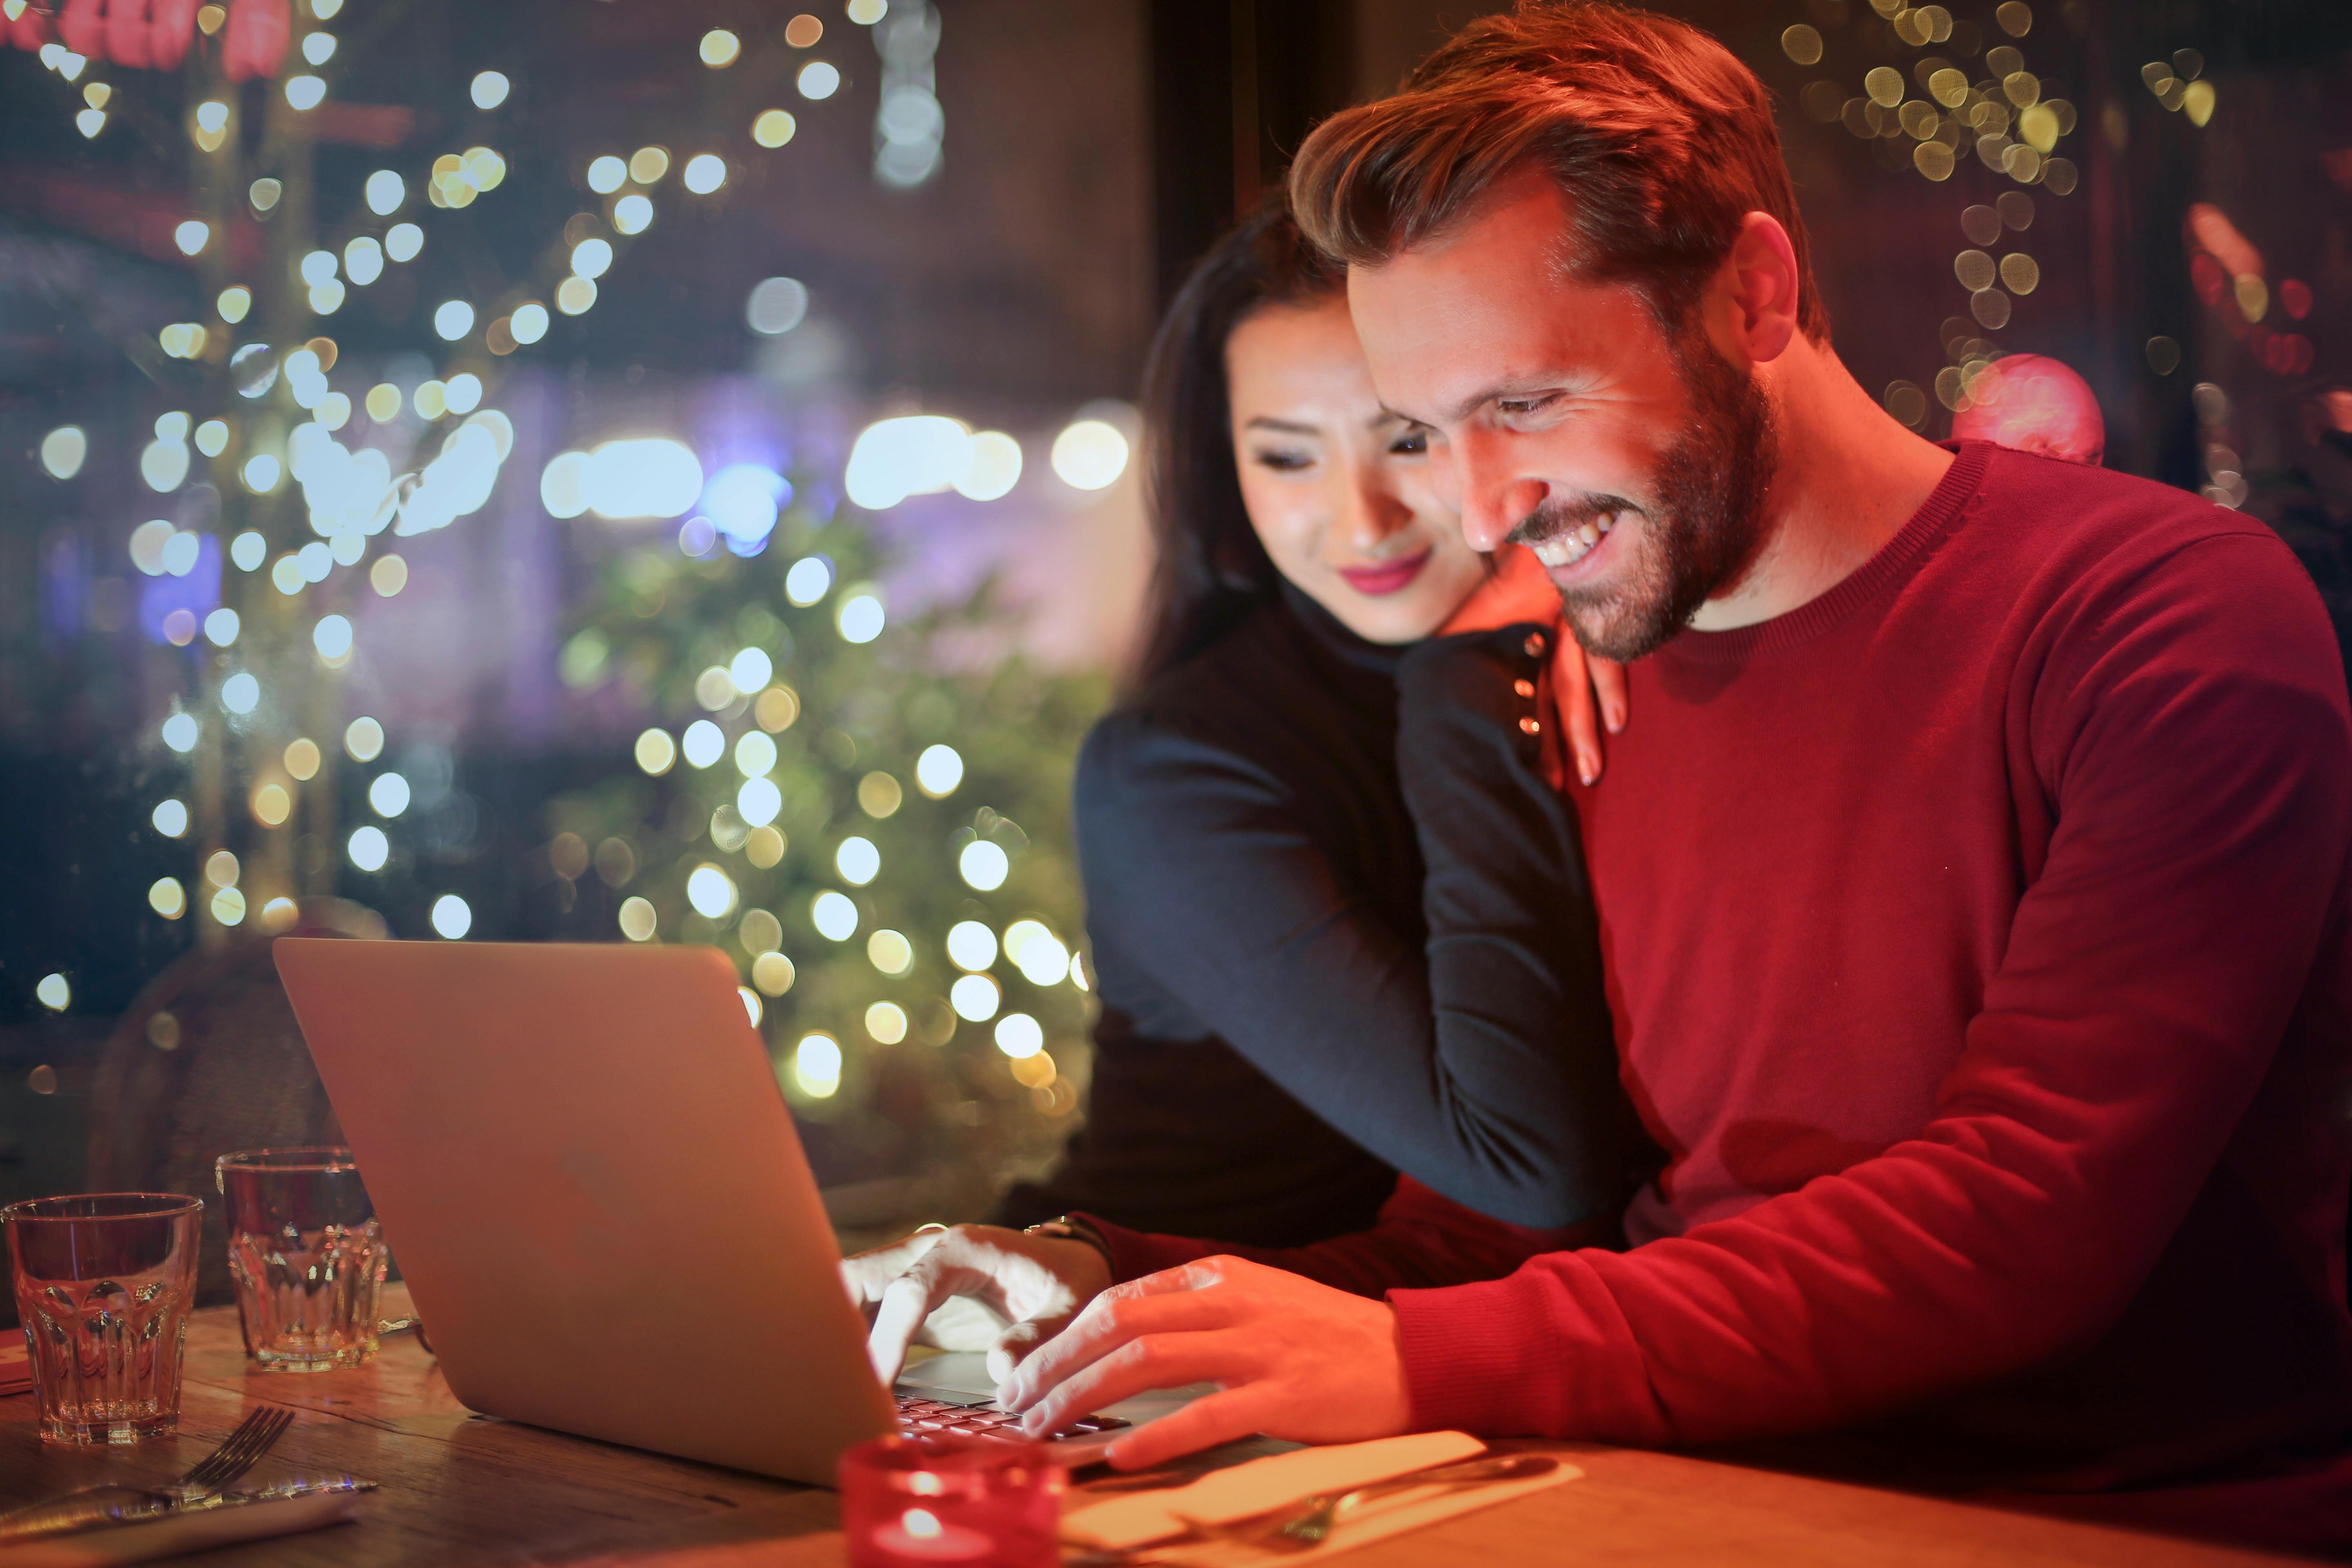 A couple looking at things on a laptop | Source: Pexels